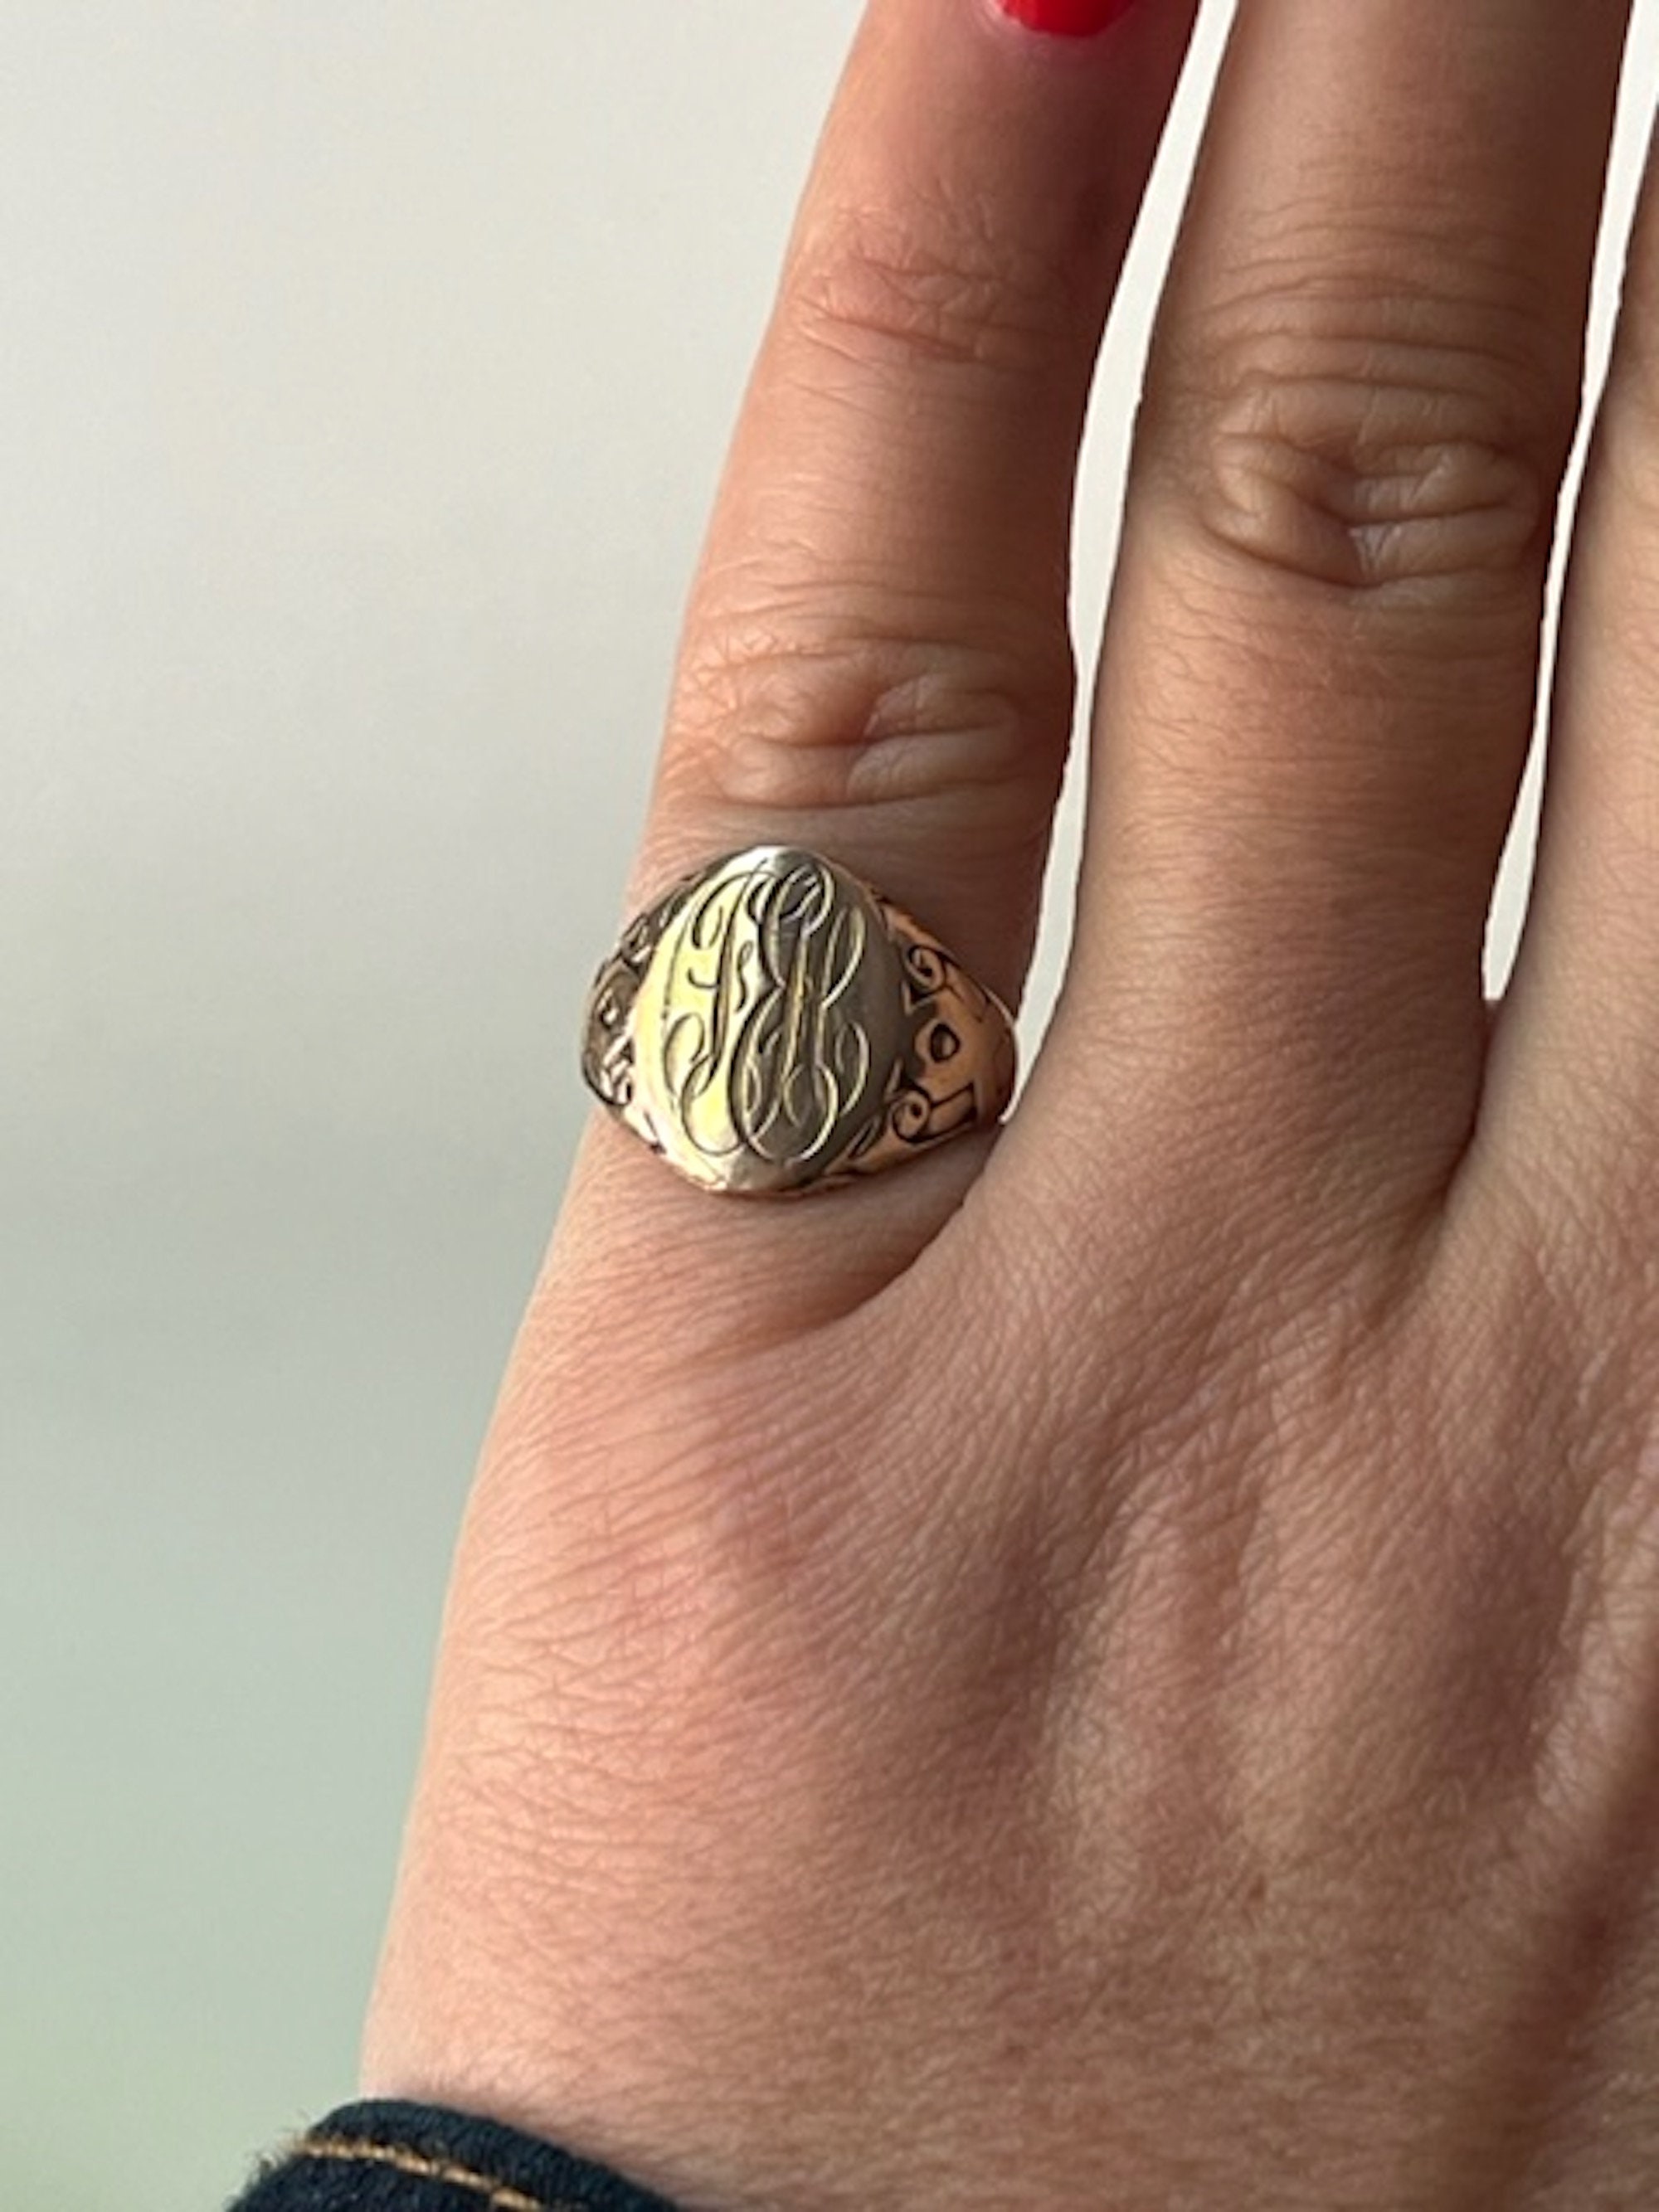 Antique 14k Gold Signet Ring With Woman's Figure Monogram Signet Ring –  LUXXOR Vintage